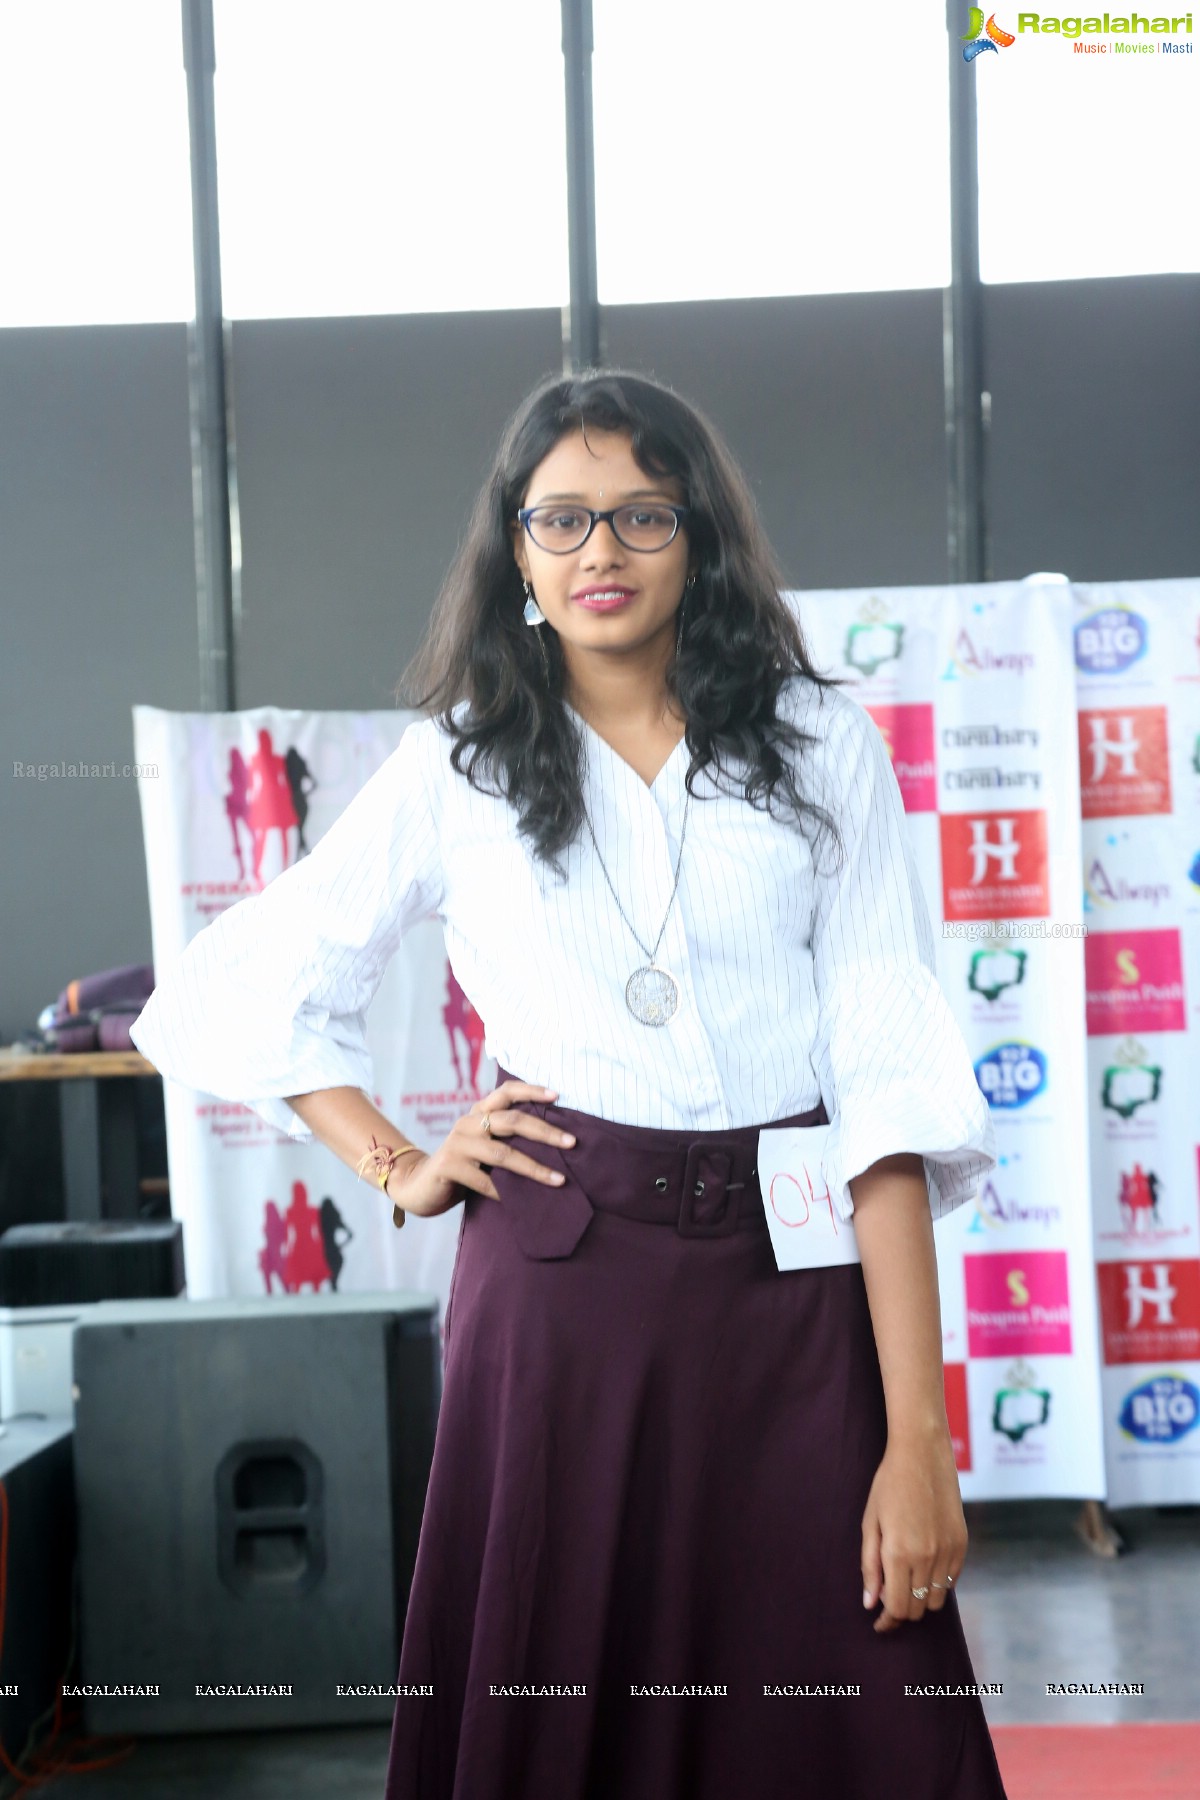 Mr and Miss Telangana 2019 2nd Auditions @ Chemistry, Jubilee Hills